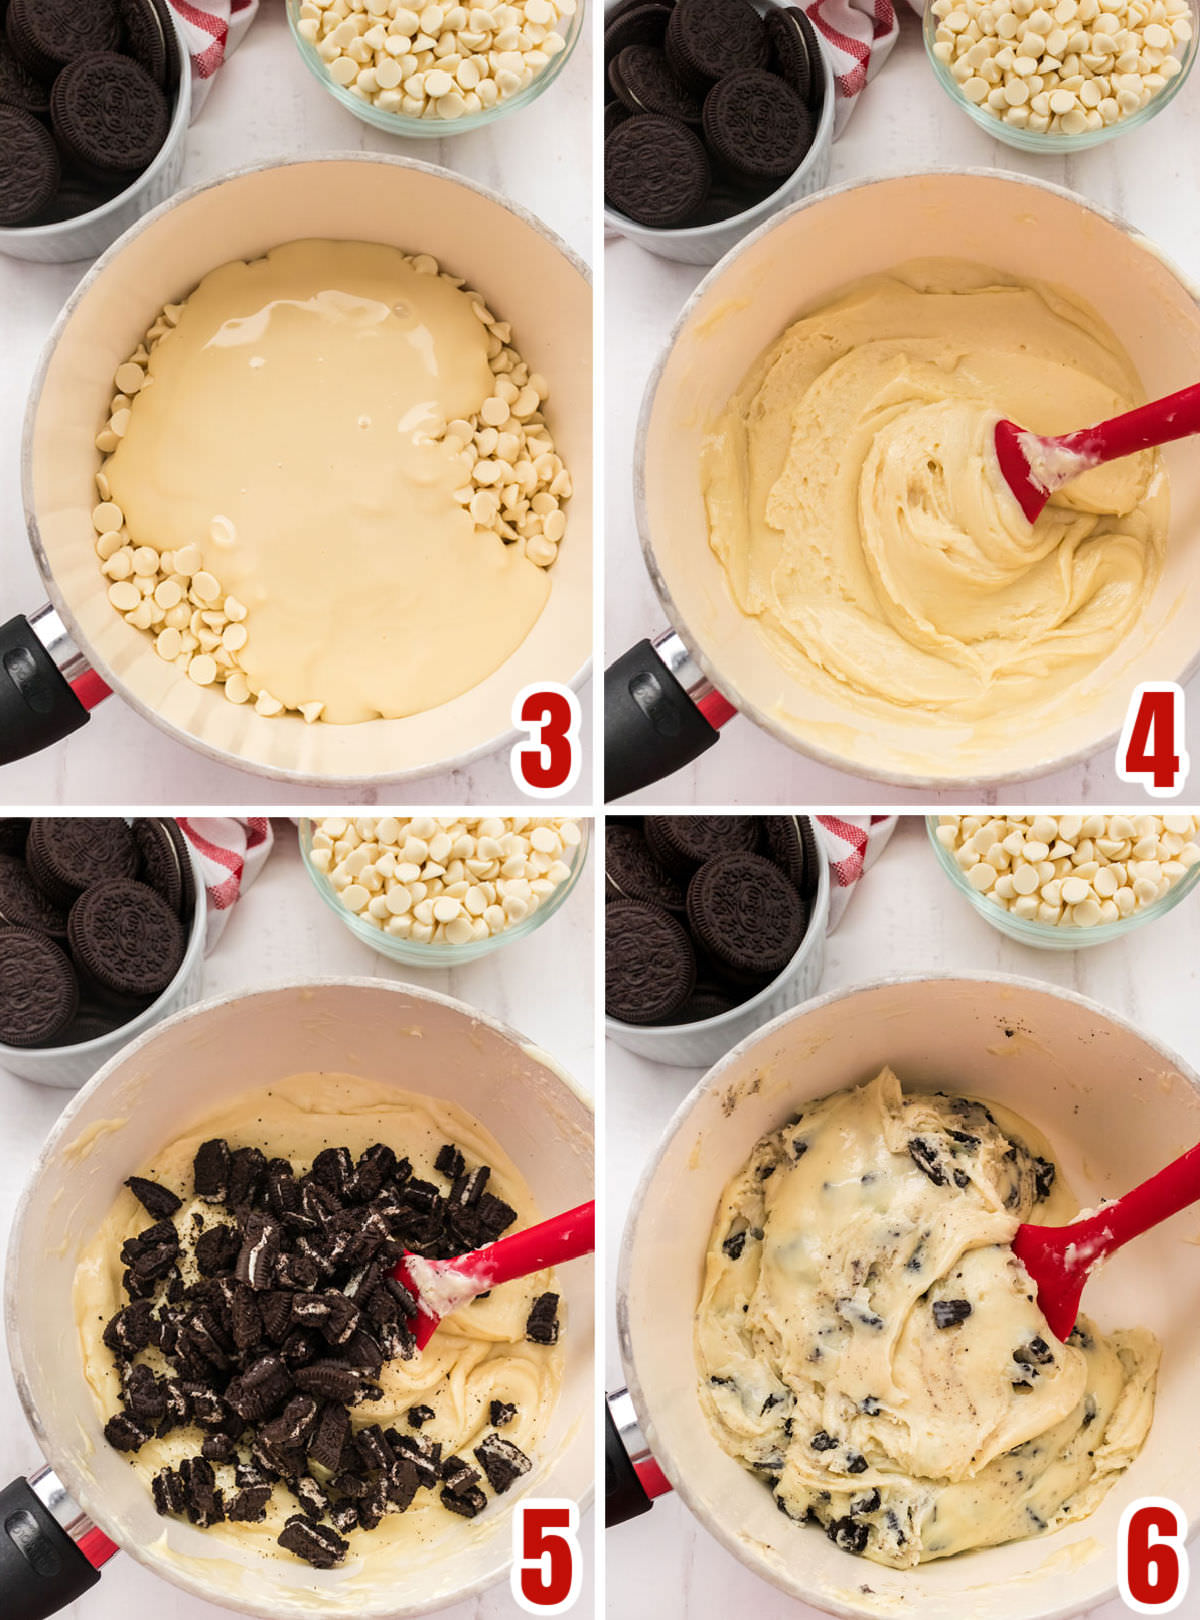 Collage image showing the steps for making the Oreo Fudge mixture.